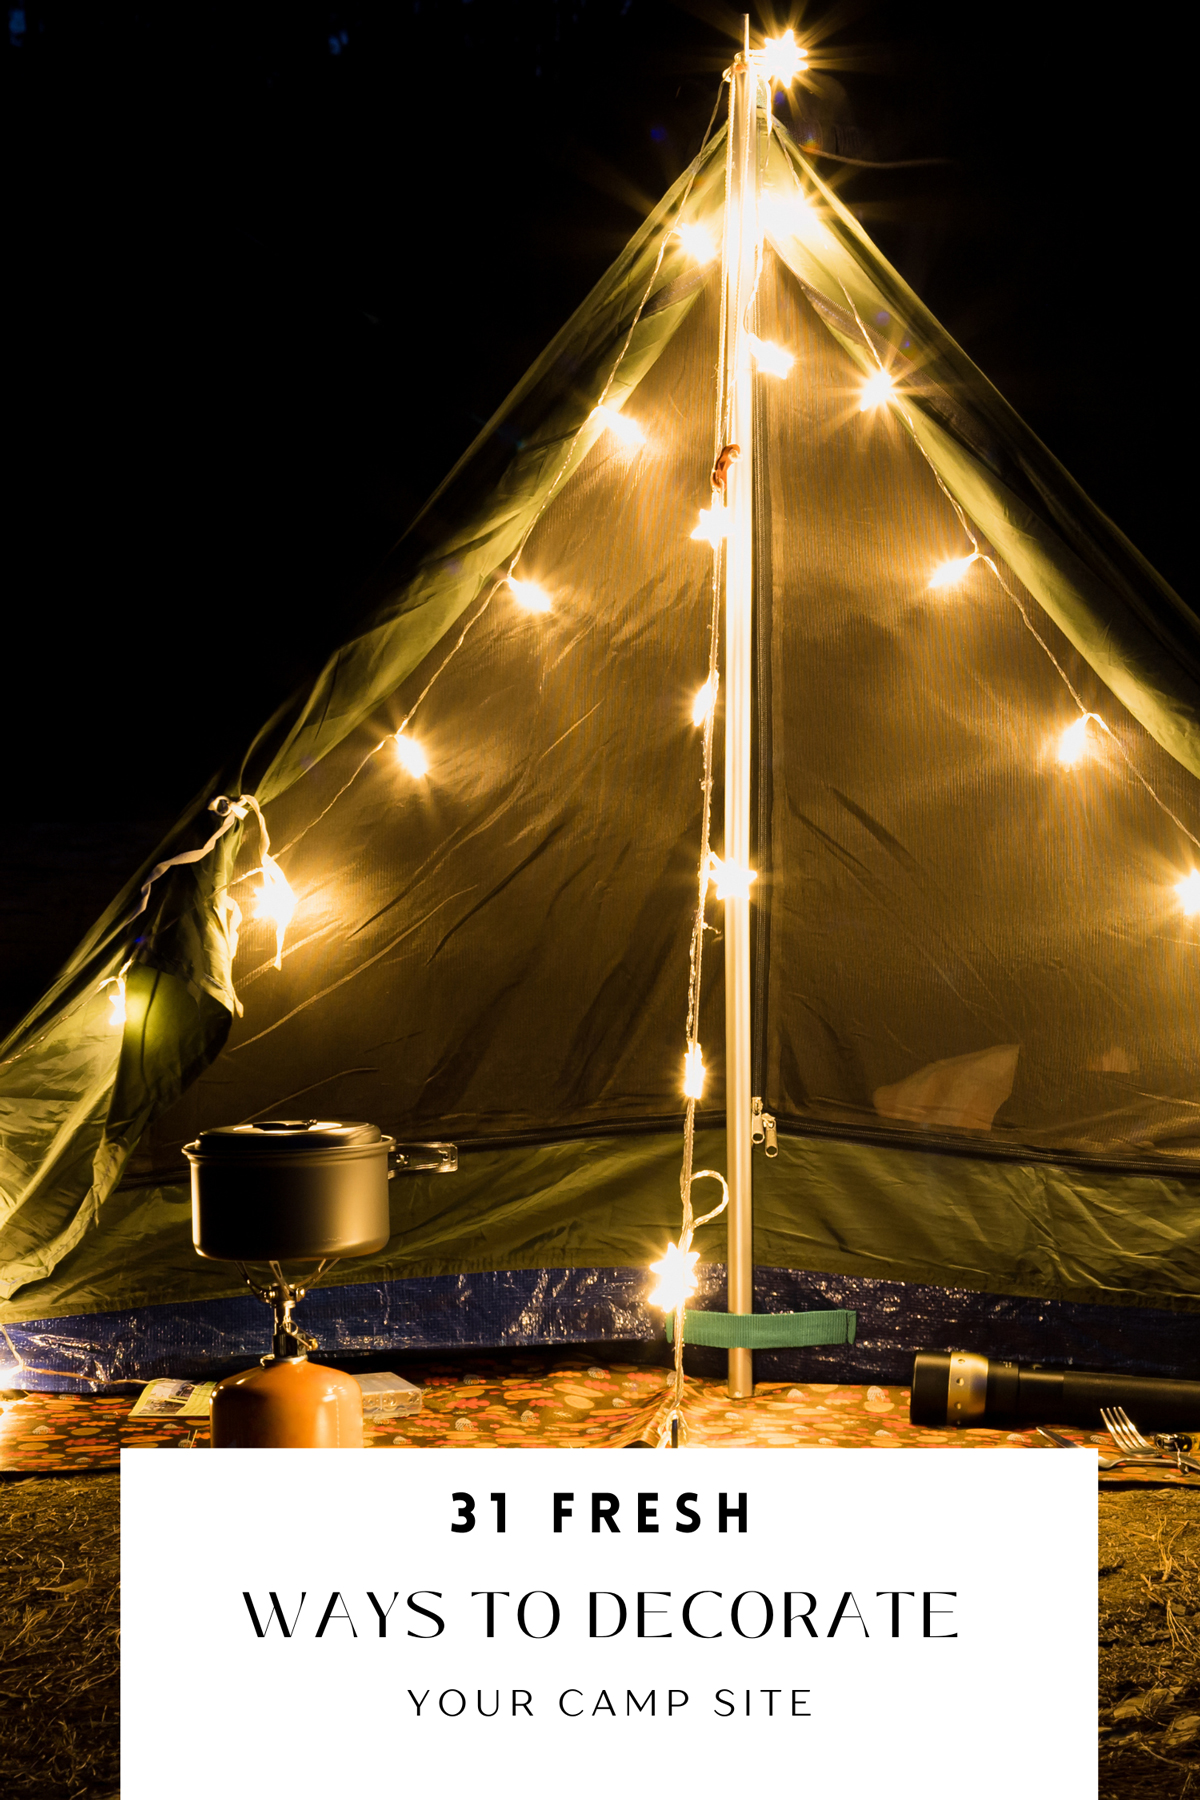 Cozy ways to decorate a tent